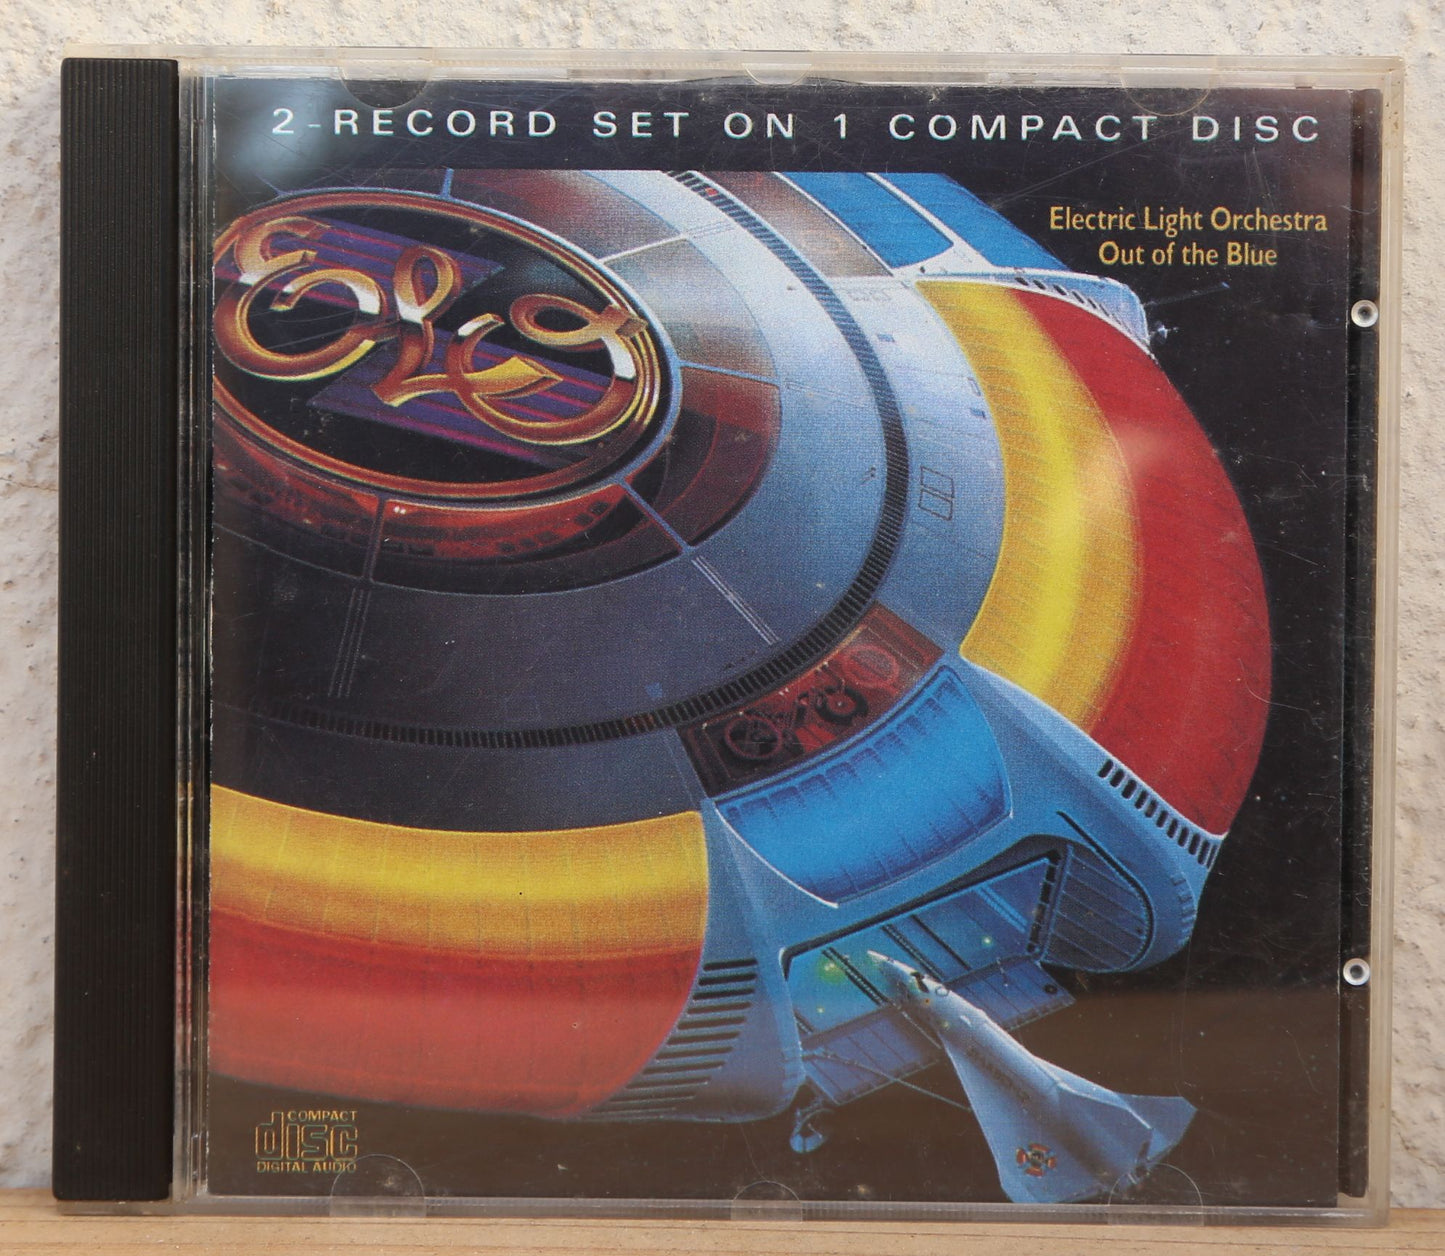 Electric Light Orchestra - Out of the blue (cd)